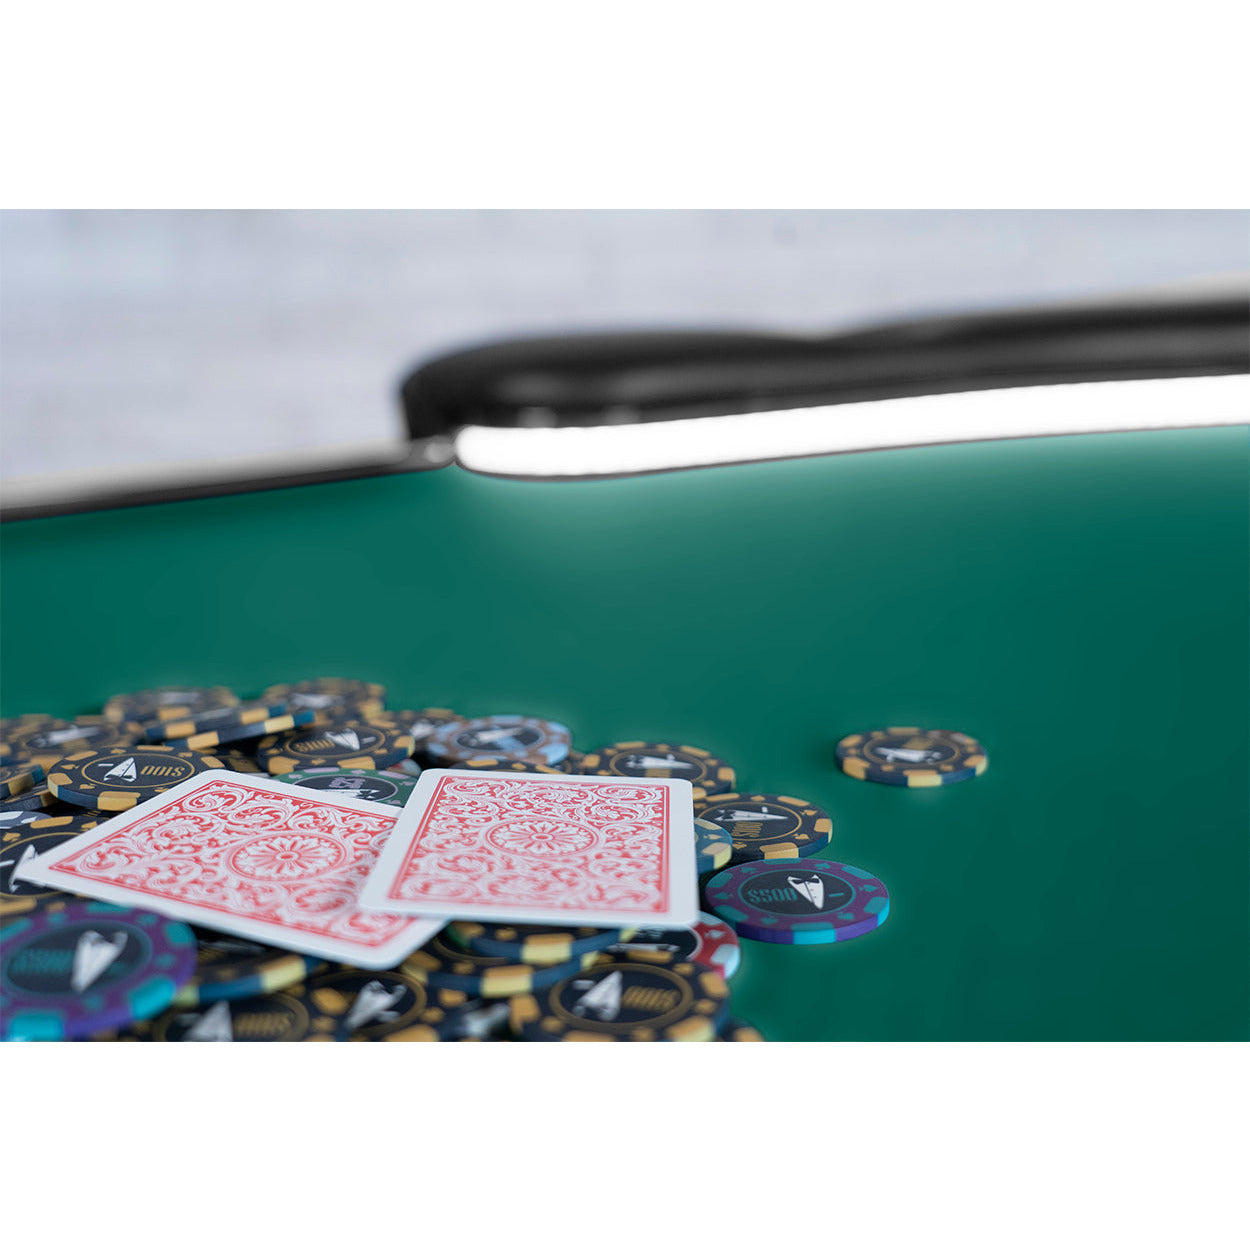 BBO The Aces Pro Alpha Folding Poker Table green close up of cards and chips 